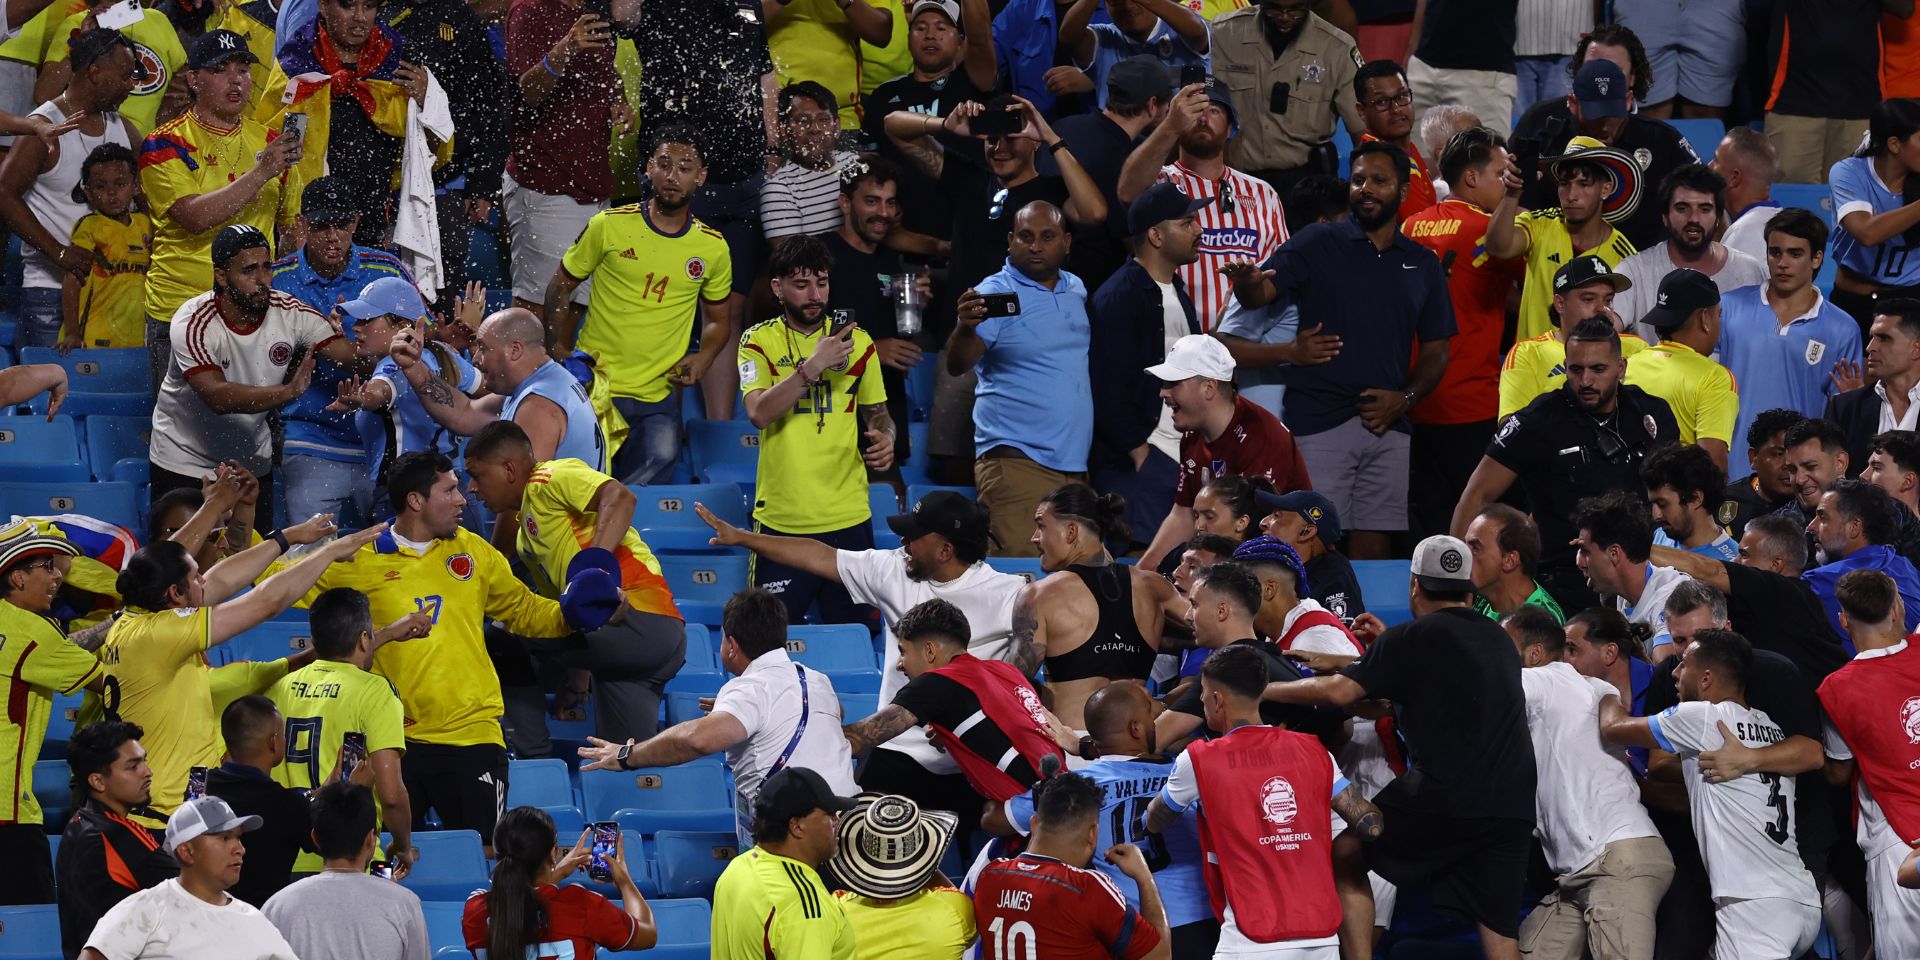 Nunez crowd brawl evidence handed to CONMEBOL ahead of punishment decision – report